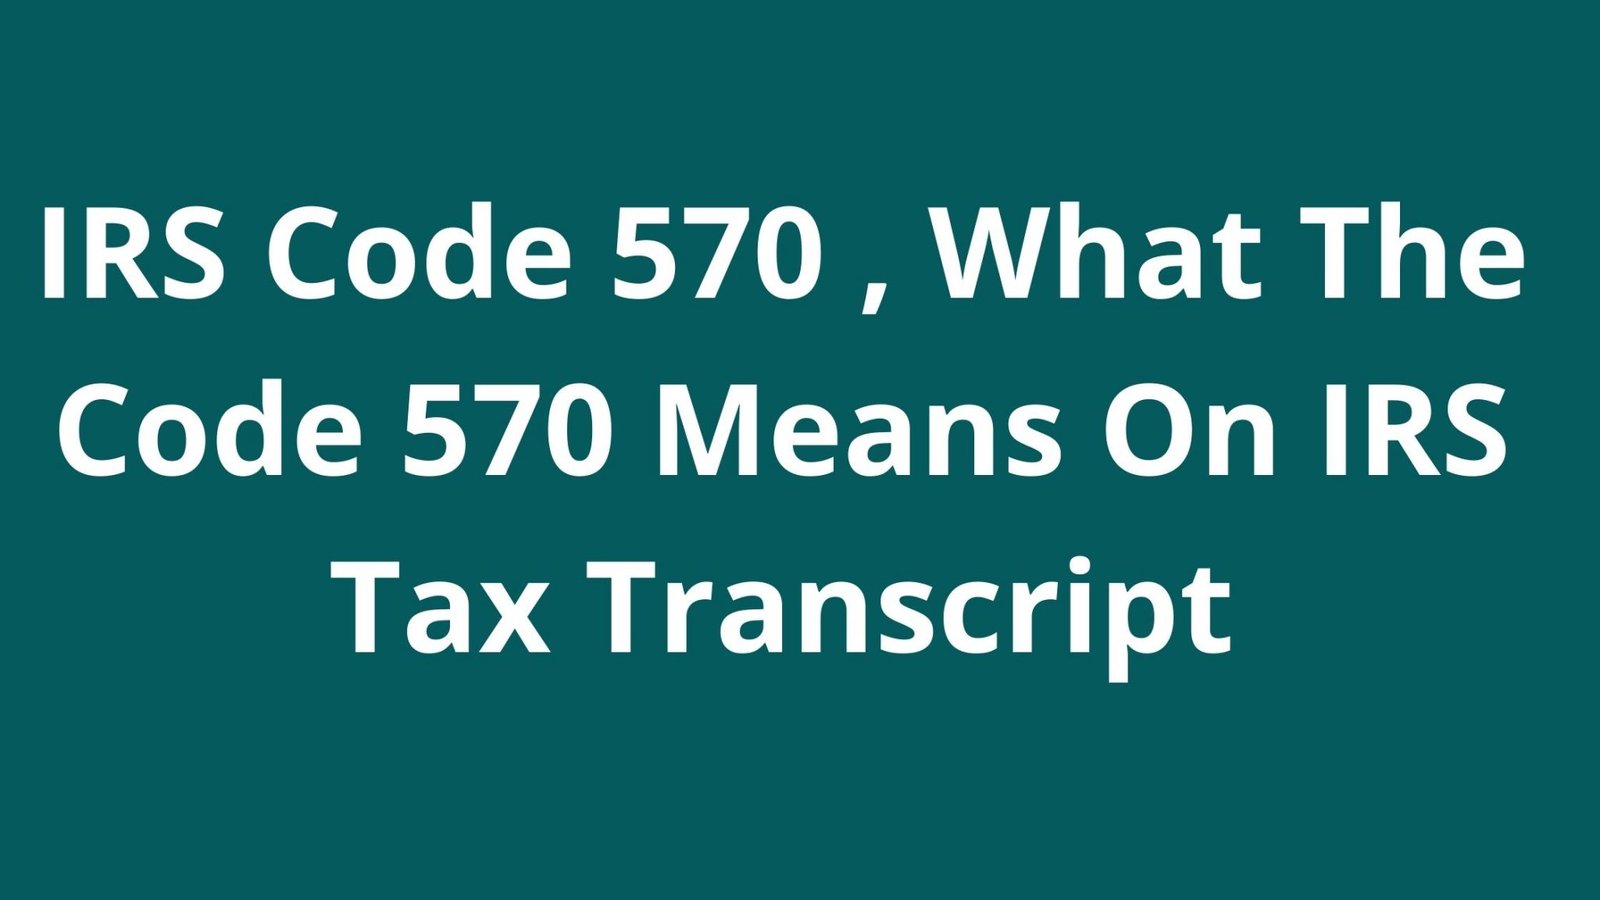 IRS Code 570, What The Code 570 Means On IRS Tax Transcript 2022/2023